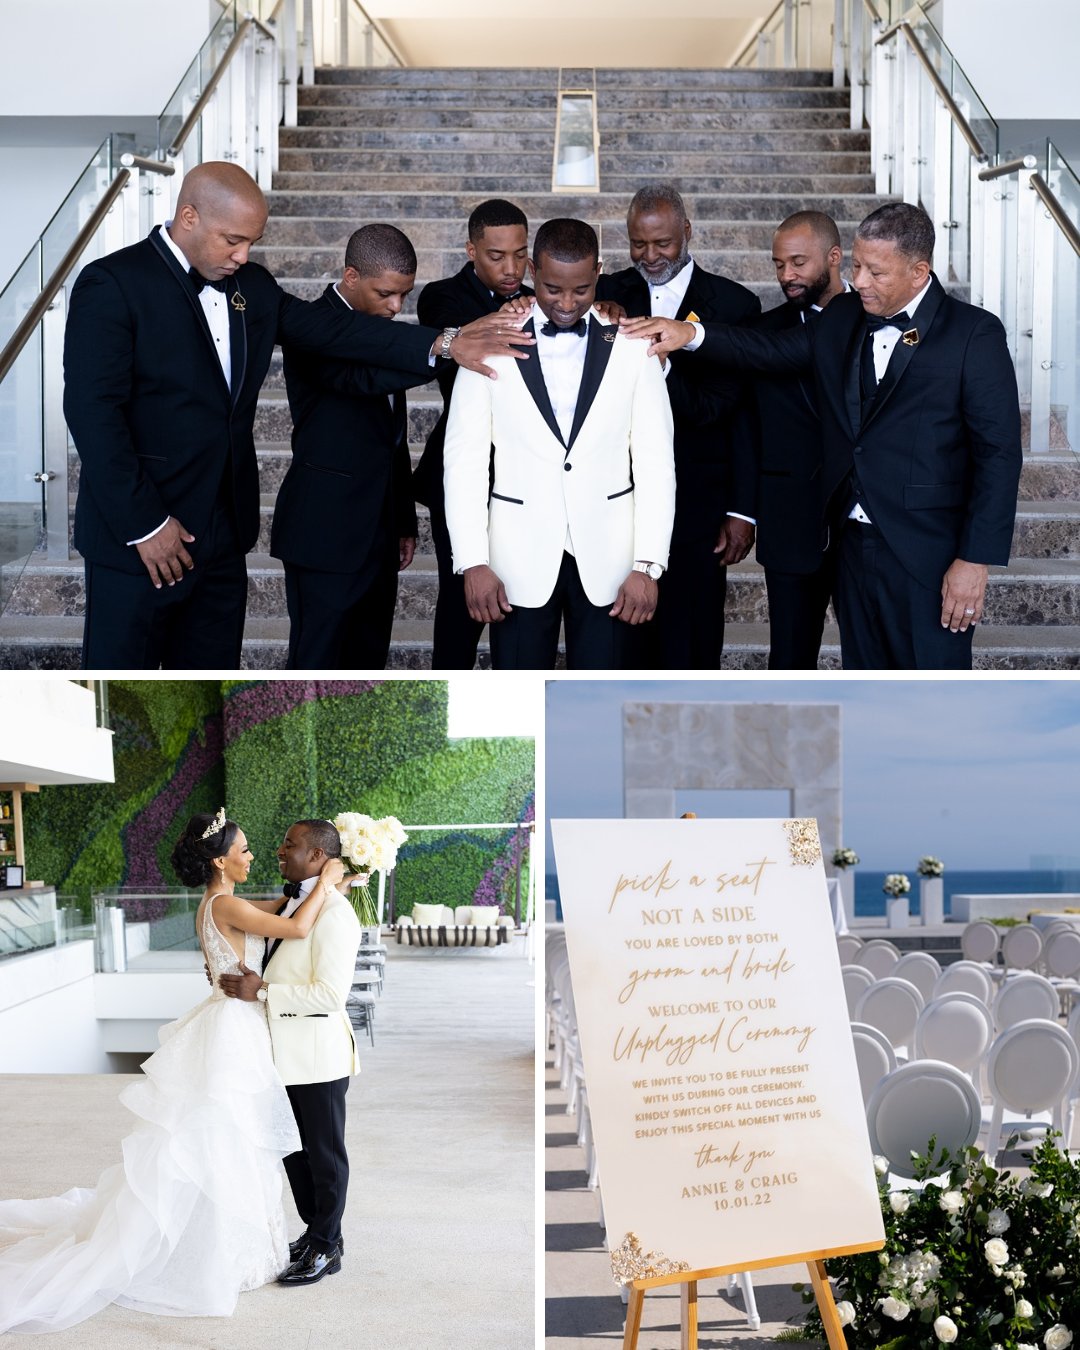 groom praying with groomsmen; Annie and Craig embrace at first look; Pick a seat sign at ceremony